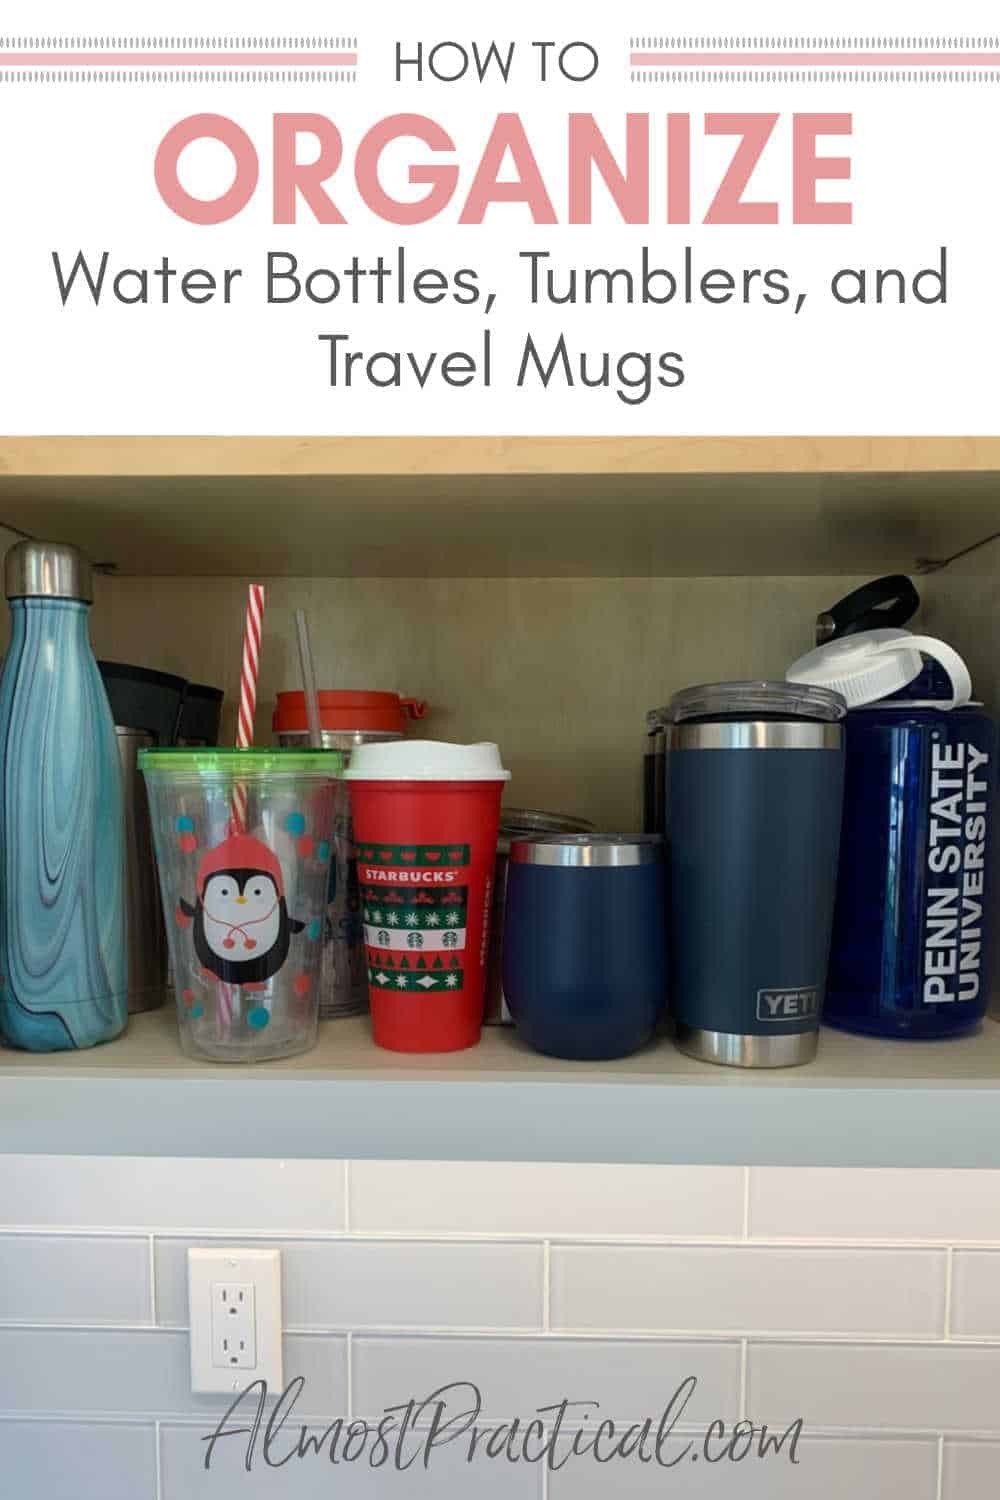 How to Organize Water Bottles, Tumblers, and Travel Mugs